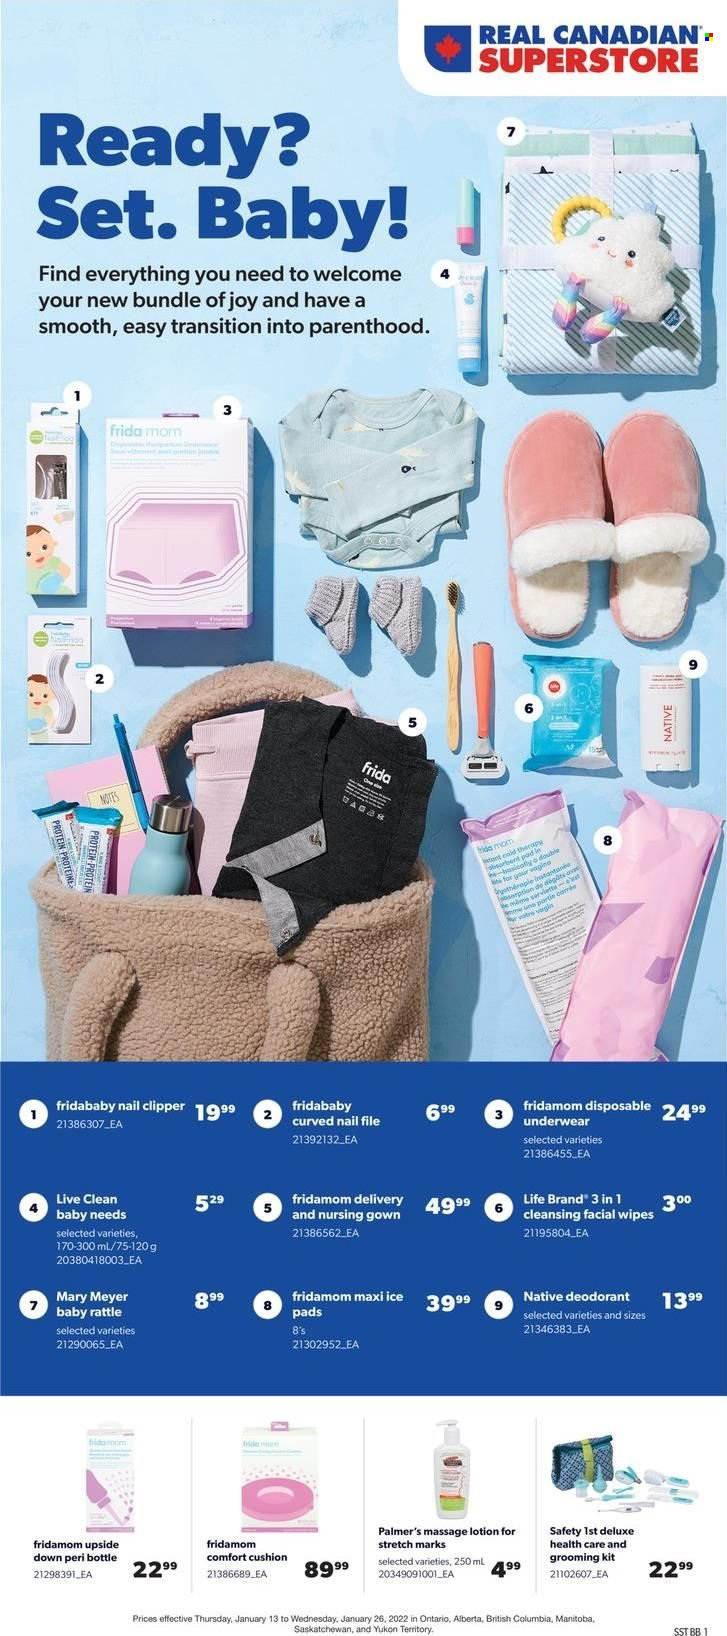 Real Canadian Superstore Flyer - January 13, 2022 - January 26, 2022 - Sales products - wipes, Joy, body lotion, anti-perspirant, clipper, cushion, rattle, deodorant. Page 1.